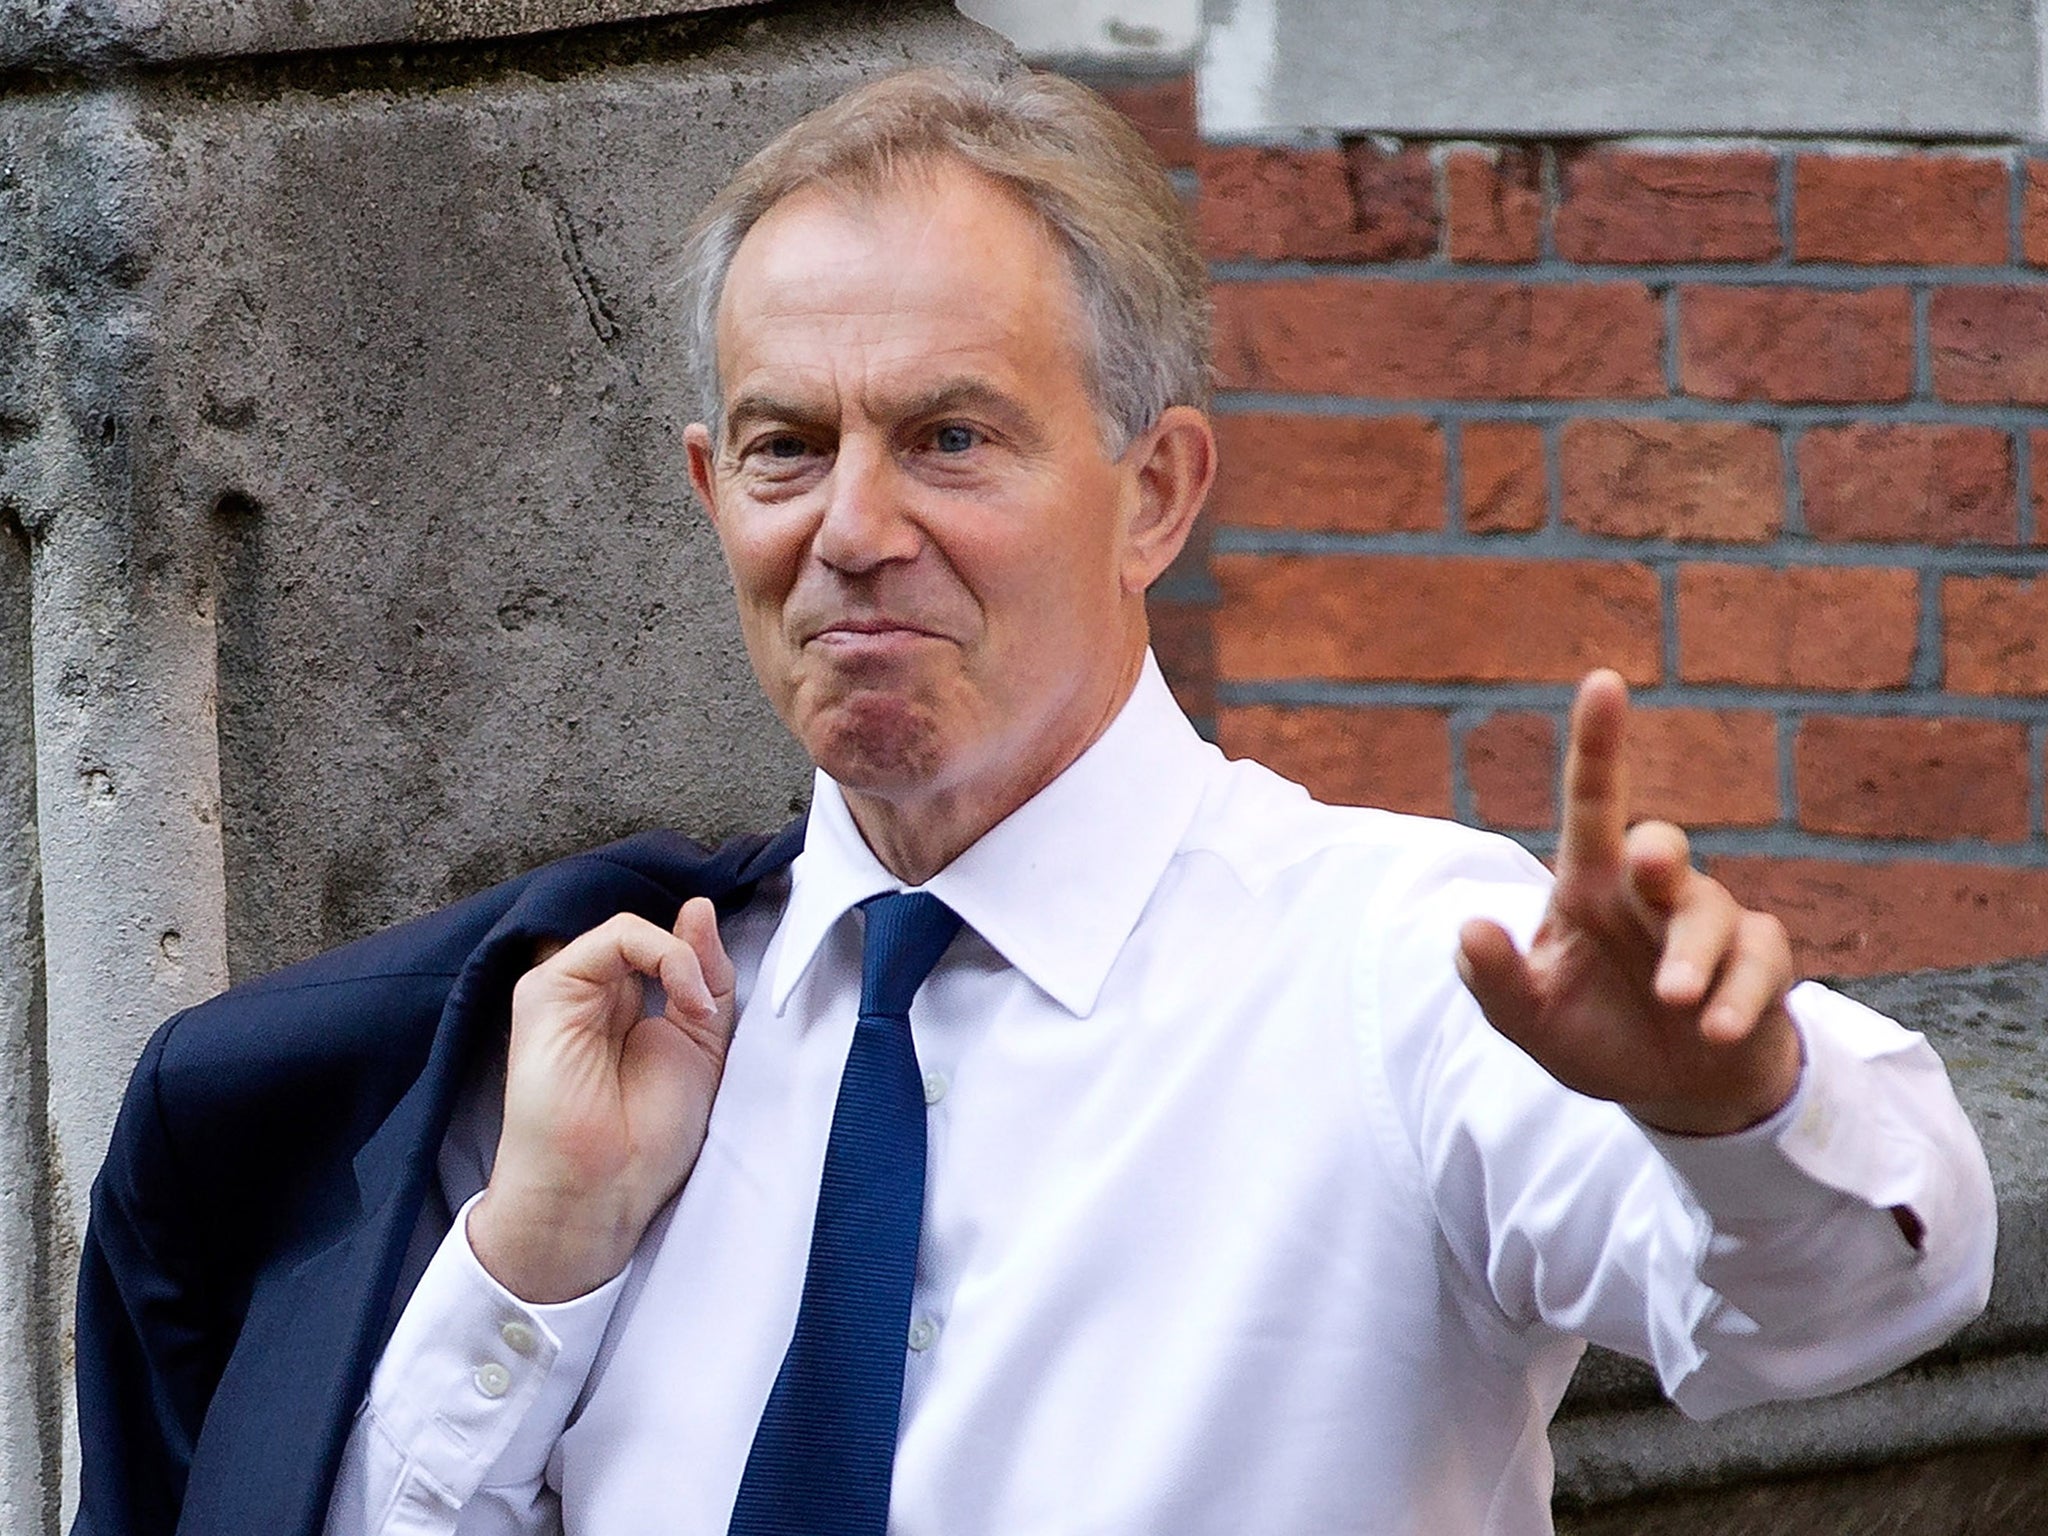 Tony Blair described the Act as one of his greatest regrets